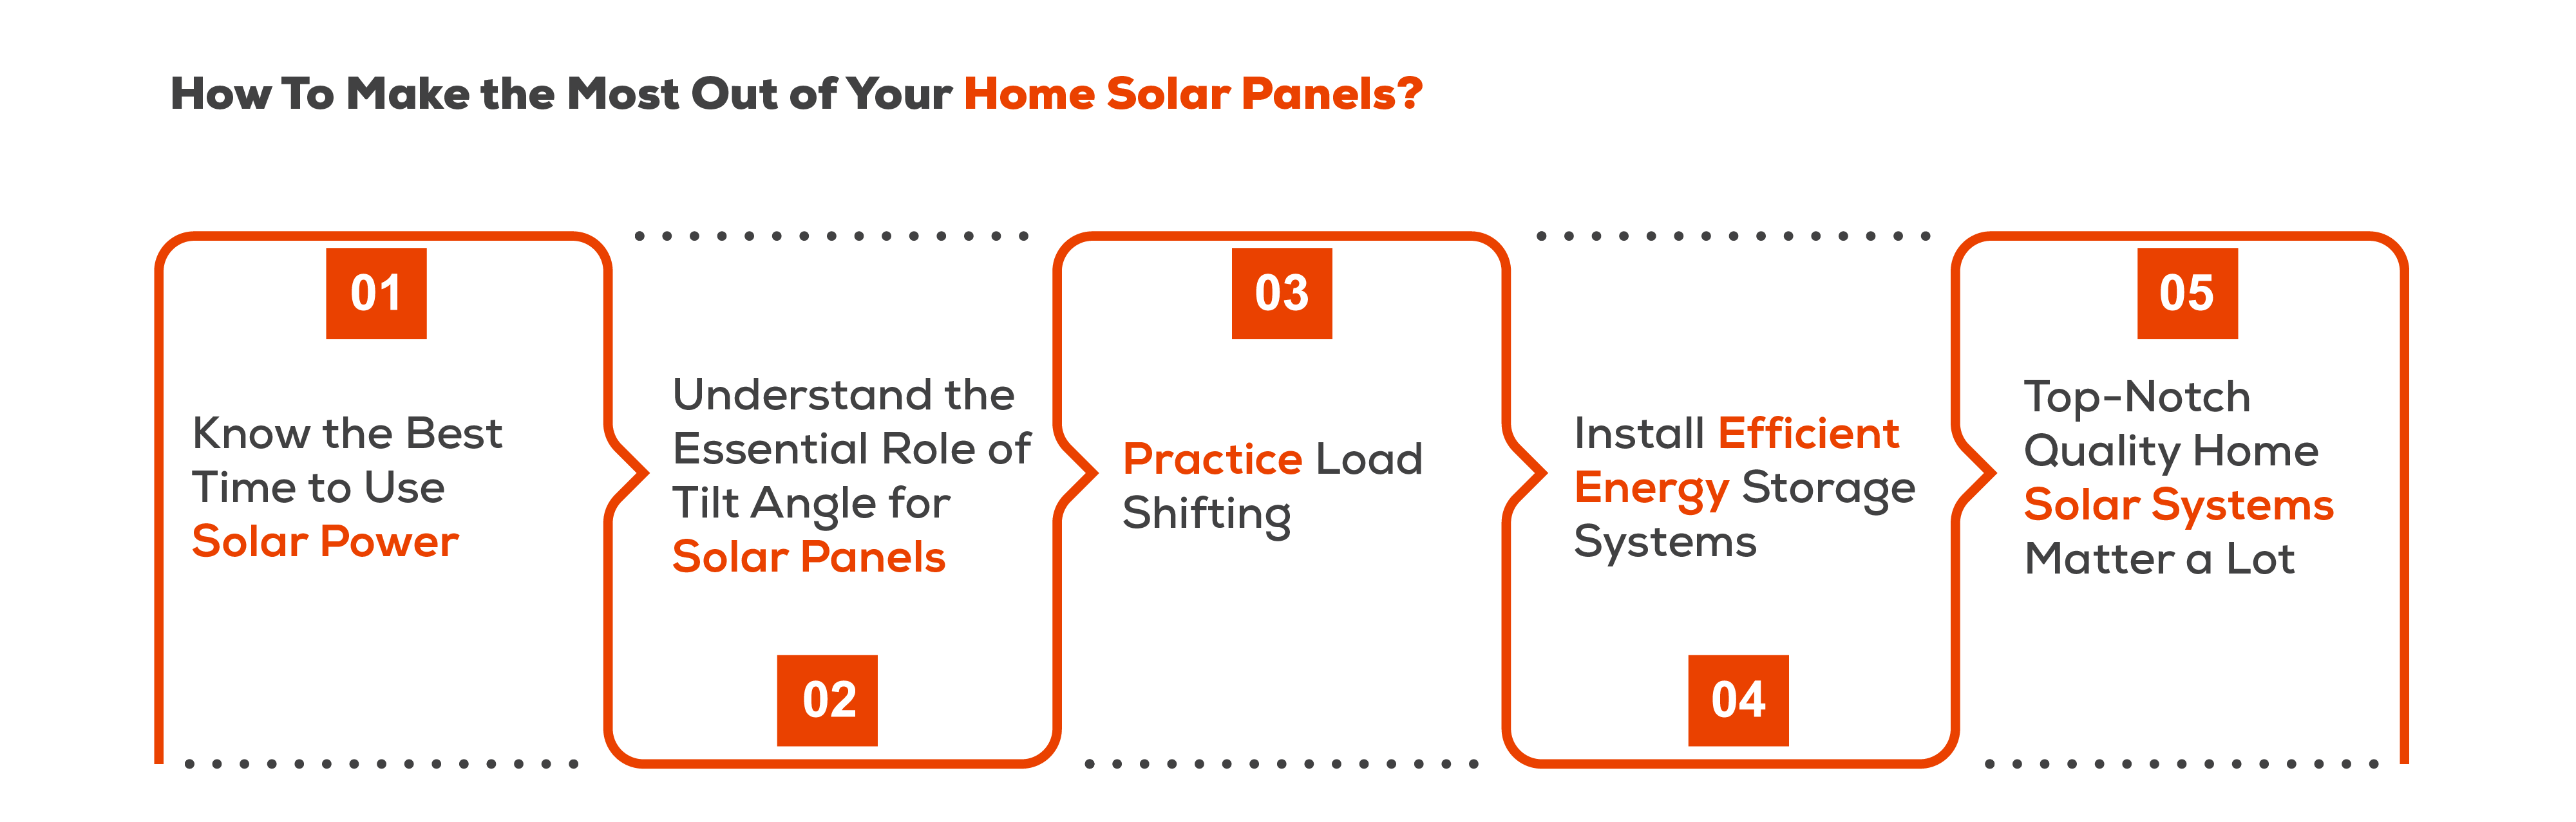 How To Make the Most Out of Your Home Solar Panels?   